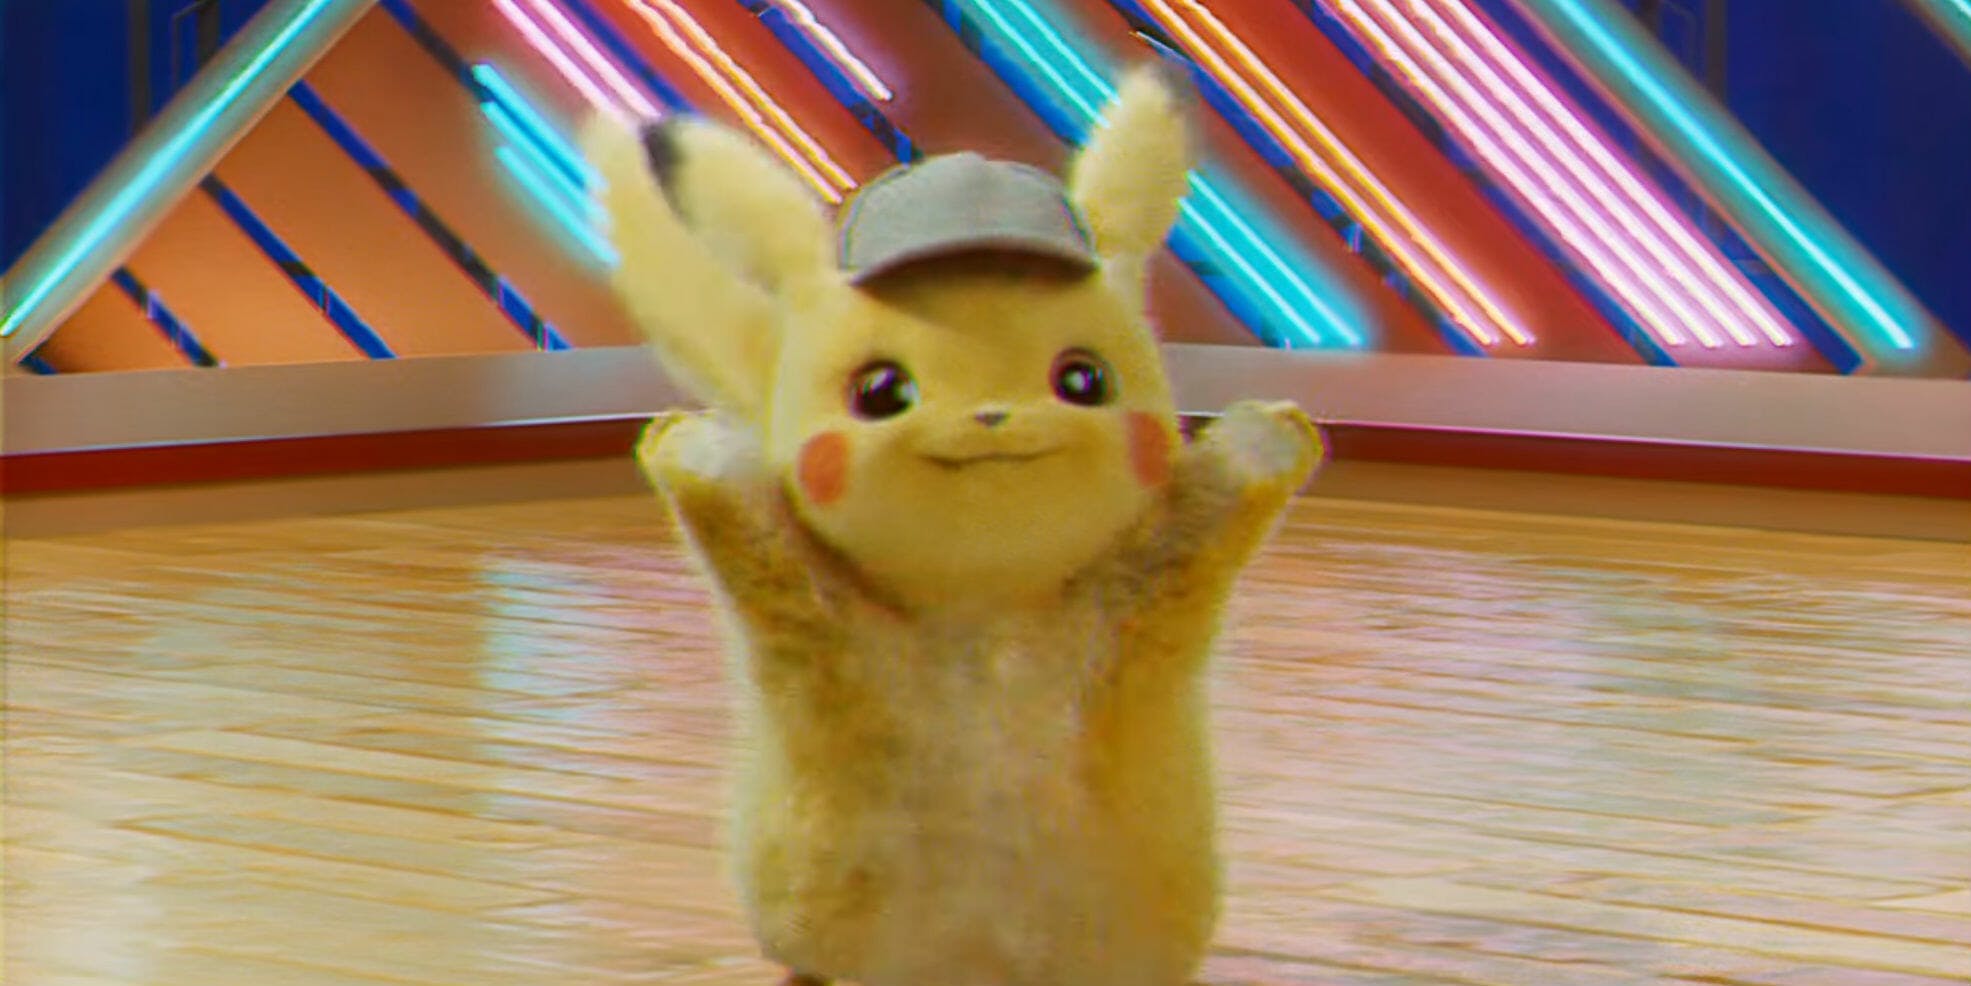 Detective Pikachu Dancing Meme Captures Twitter's Hearts and Minds